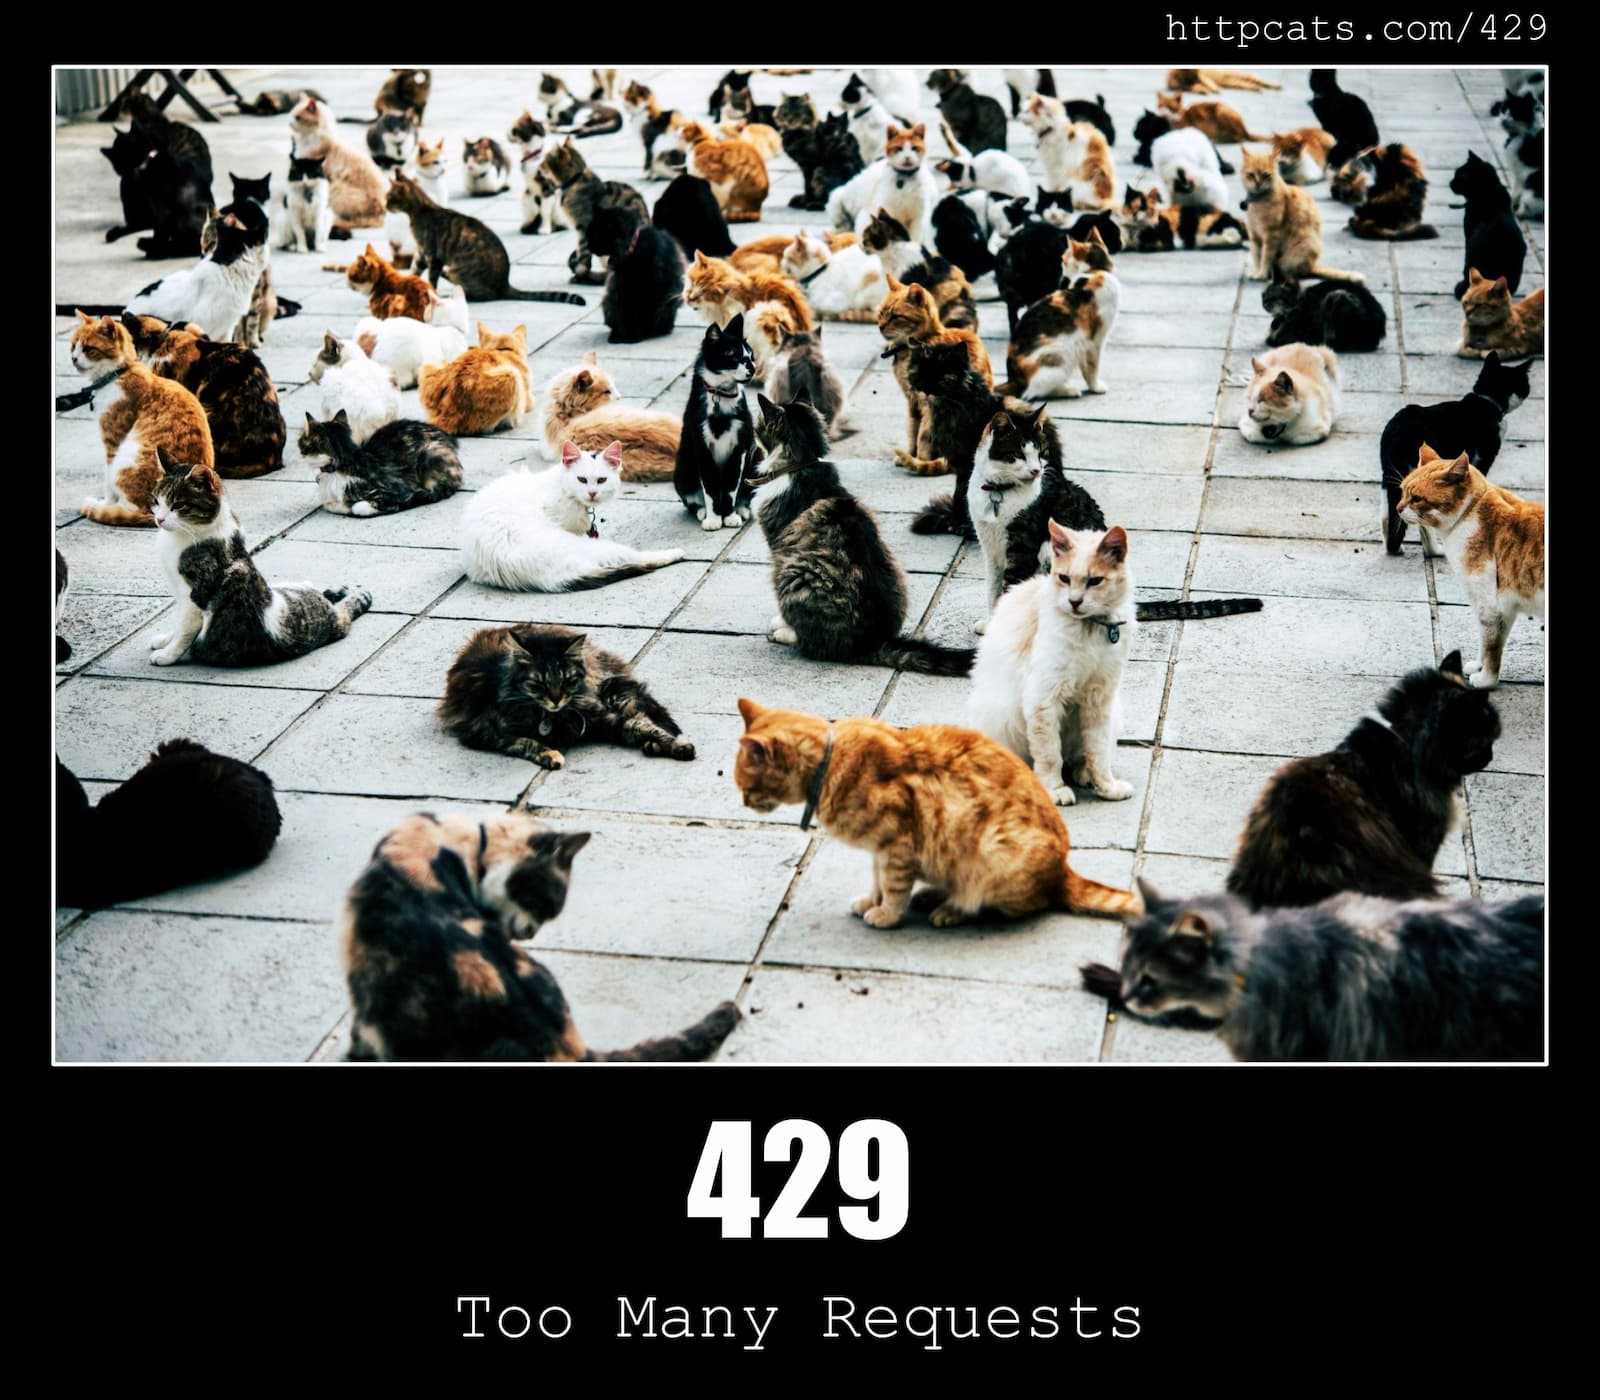 HTTP Status Code 429 Too Many Requests & Cats